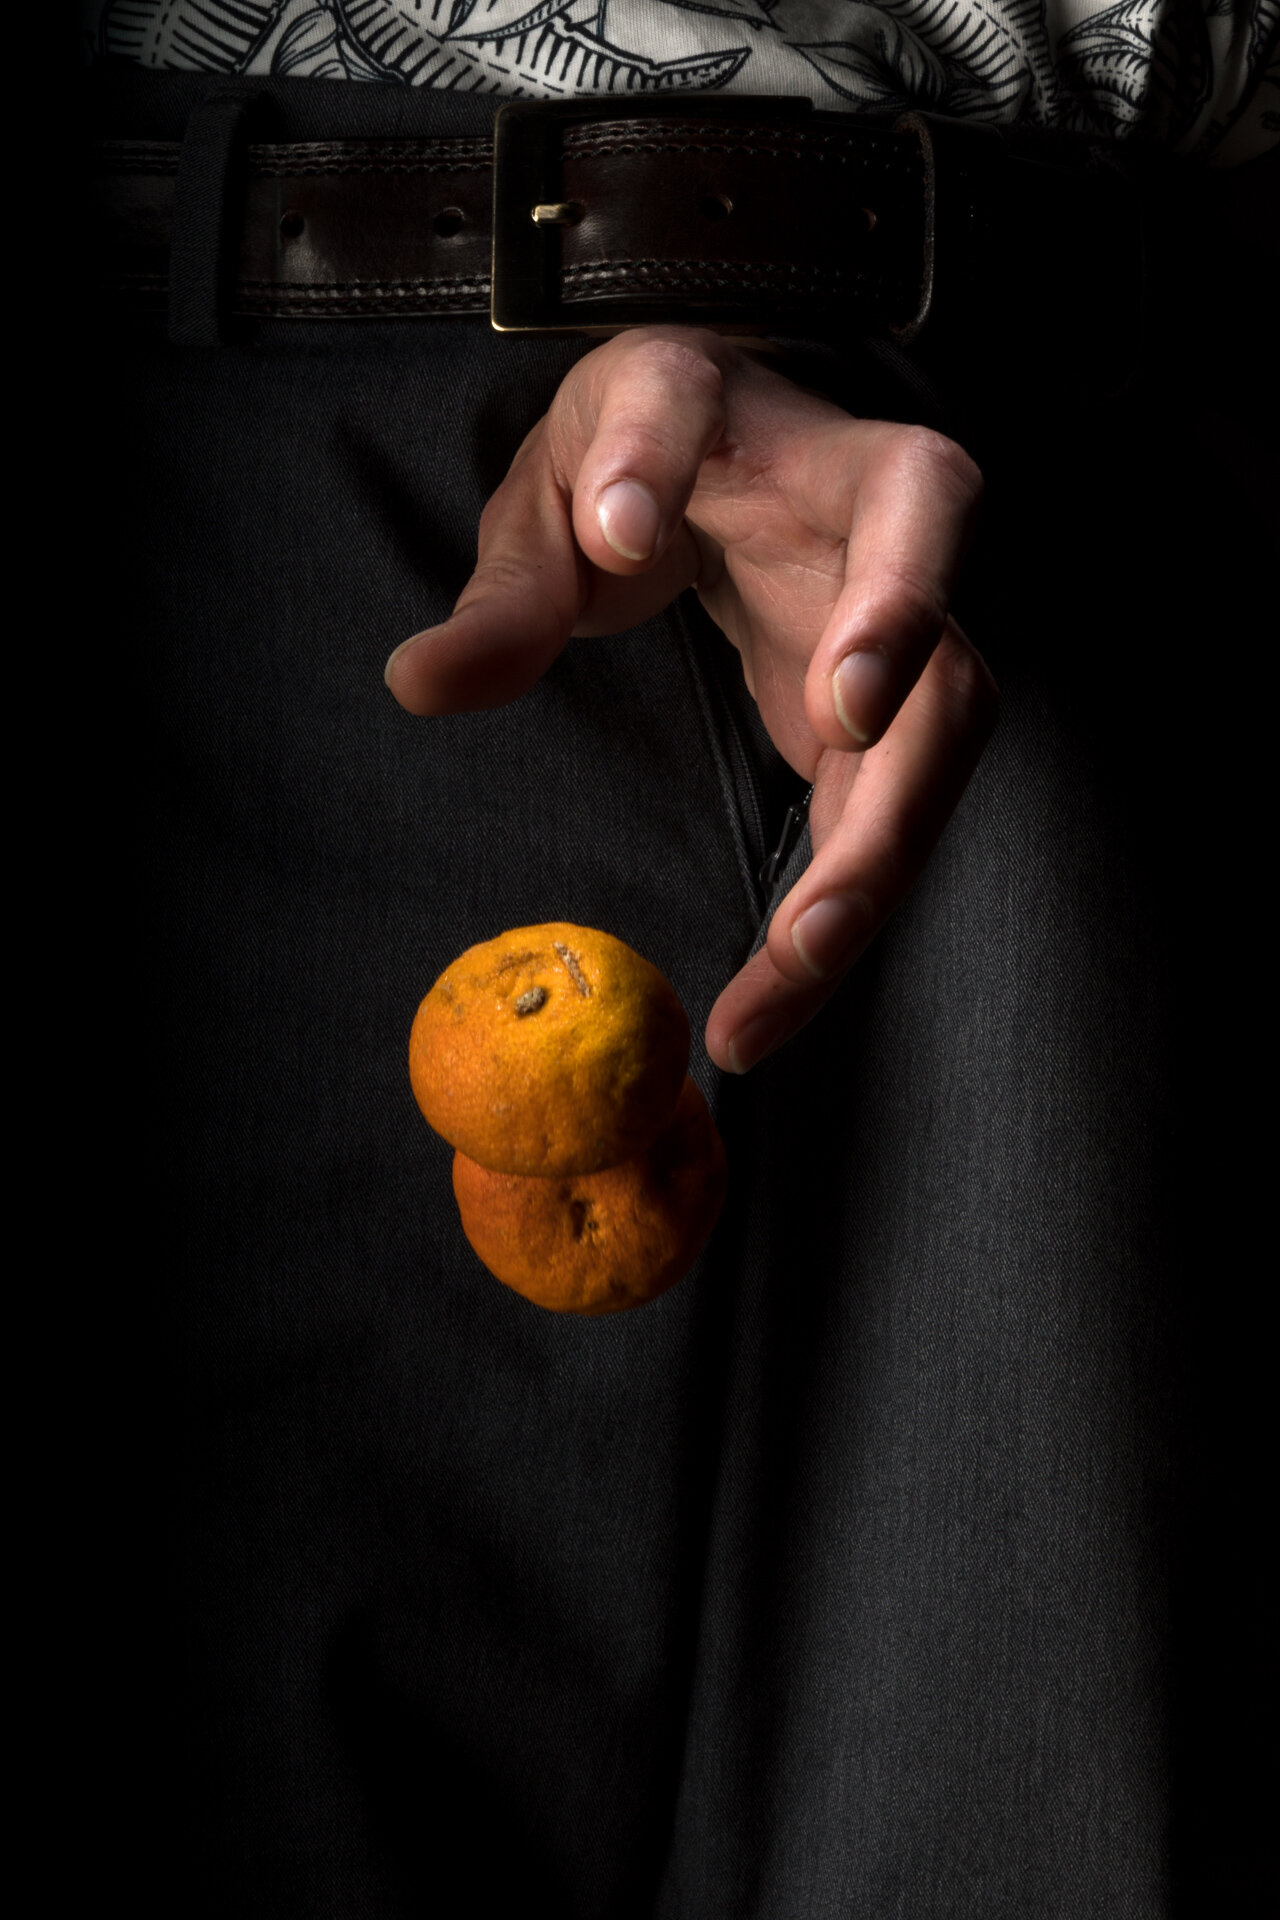 physiological-psychological-needs-Freud-Life-Death-Instincts-Maslow-male-sexual-capacity-orange-penis-dick-sex-still-life-Yi-Chen-lee-conceptual-photographer-李懿宸-photography